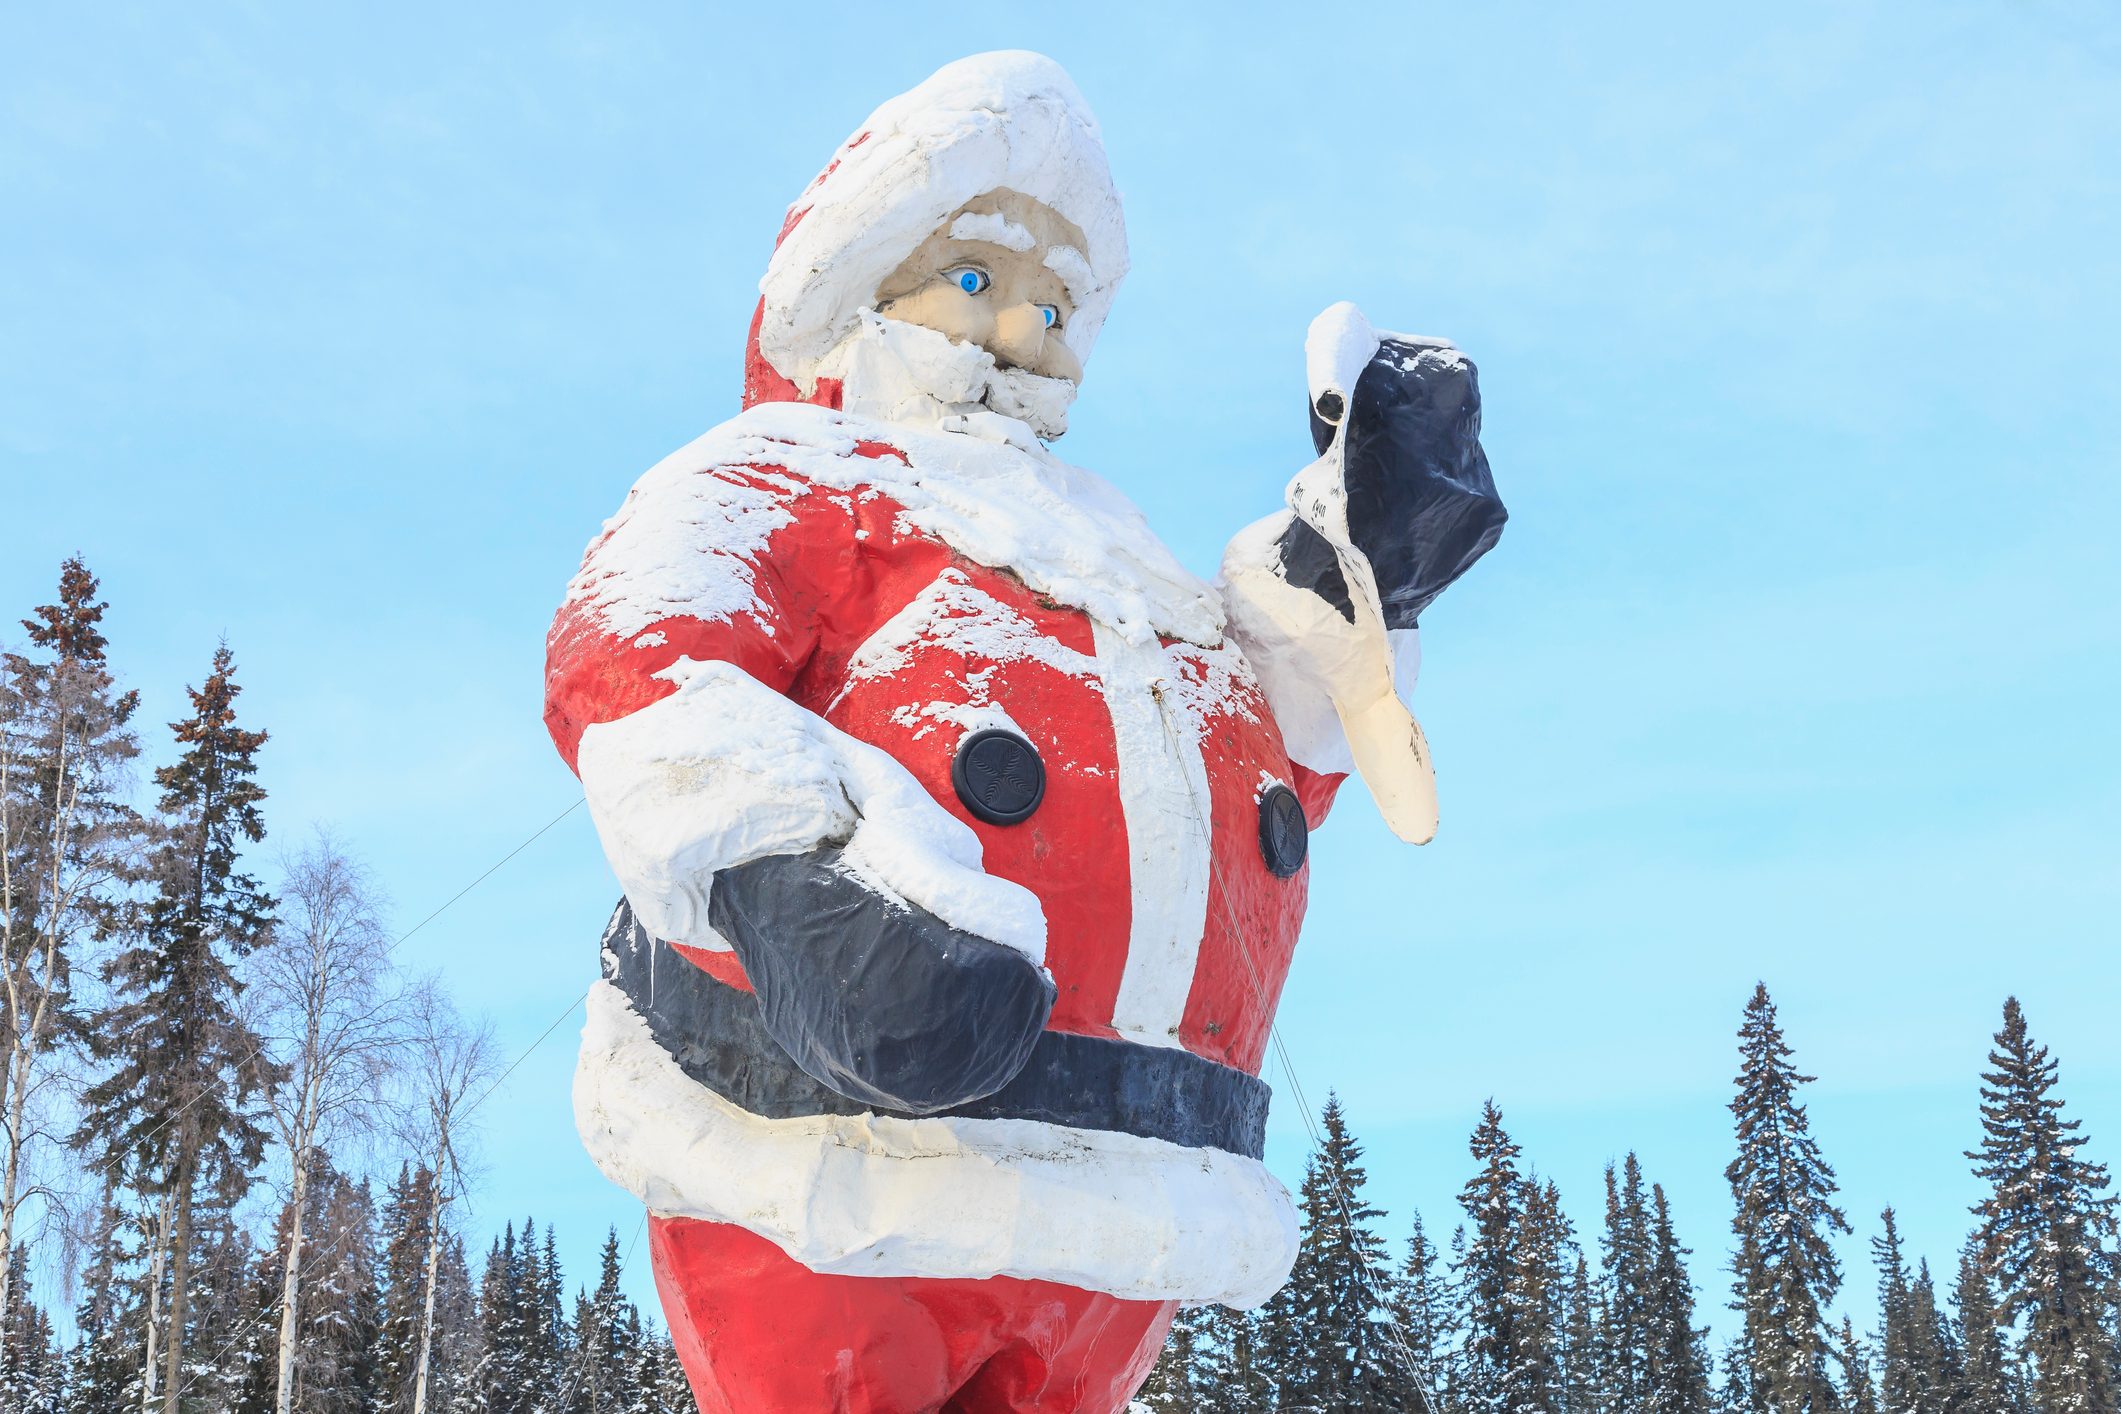 <p><strong>Best for:</strong> Northern Lights viewing</p> <p>Okay, so it might not be the actual North Pole, although it is the closest Christmas town to the real one. But this village near Fairbanks, named after Santa's Arctic abode, sure enjoys playing up its namesake. The entire city stays dressed up for Christmas all year long, but the holidays are an especially magical time—it's one of the <a href="https://www.rd.com/list/winter-destinations-ideal-vacation/">destinations that are even better in the winter</a>. The Santa Claus House is like one big giant Christmas shop, plus you'll find a reindeer farm and a giant statue of Santa himself. Travel down streets with names like Snowman Lane, Holiday Road and Saint Nicholas Drive, then be sure to mail your Christmas cards from the local post office to get that North Pole postmark. Your kids can also send <a href="https://www.rd.com/list/letters-to-santa/">letters to Santa</a> at North Pole, Alaska—and receive a response back!</p> <p>The locally run <a href="https://www.tripadvisor.com/Hotel_Review-g31079-d1776834-Reviews-Hotel_North_Pole-North_Pole_Alaska.html" rel="noopener">Hotel North Pole</a> offers plenty of Christmas kitsch—ask about booking the Santa Suite for extra special holiday decor. You may even be able to see the Northern Lights right from your hotel window.</p> <p class="listicle-page__cta-button-shop"><a class="shop-btn" href="https://www.tripadvisor.com/Hotel_Review-g31079-d1776834-Reviews-Hotel_North_Pole-North_Pole_Alaska.html">Book Now</a></p>